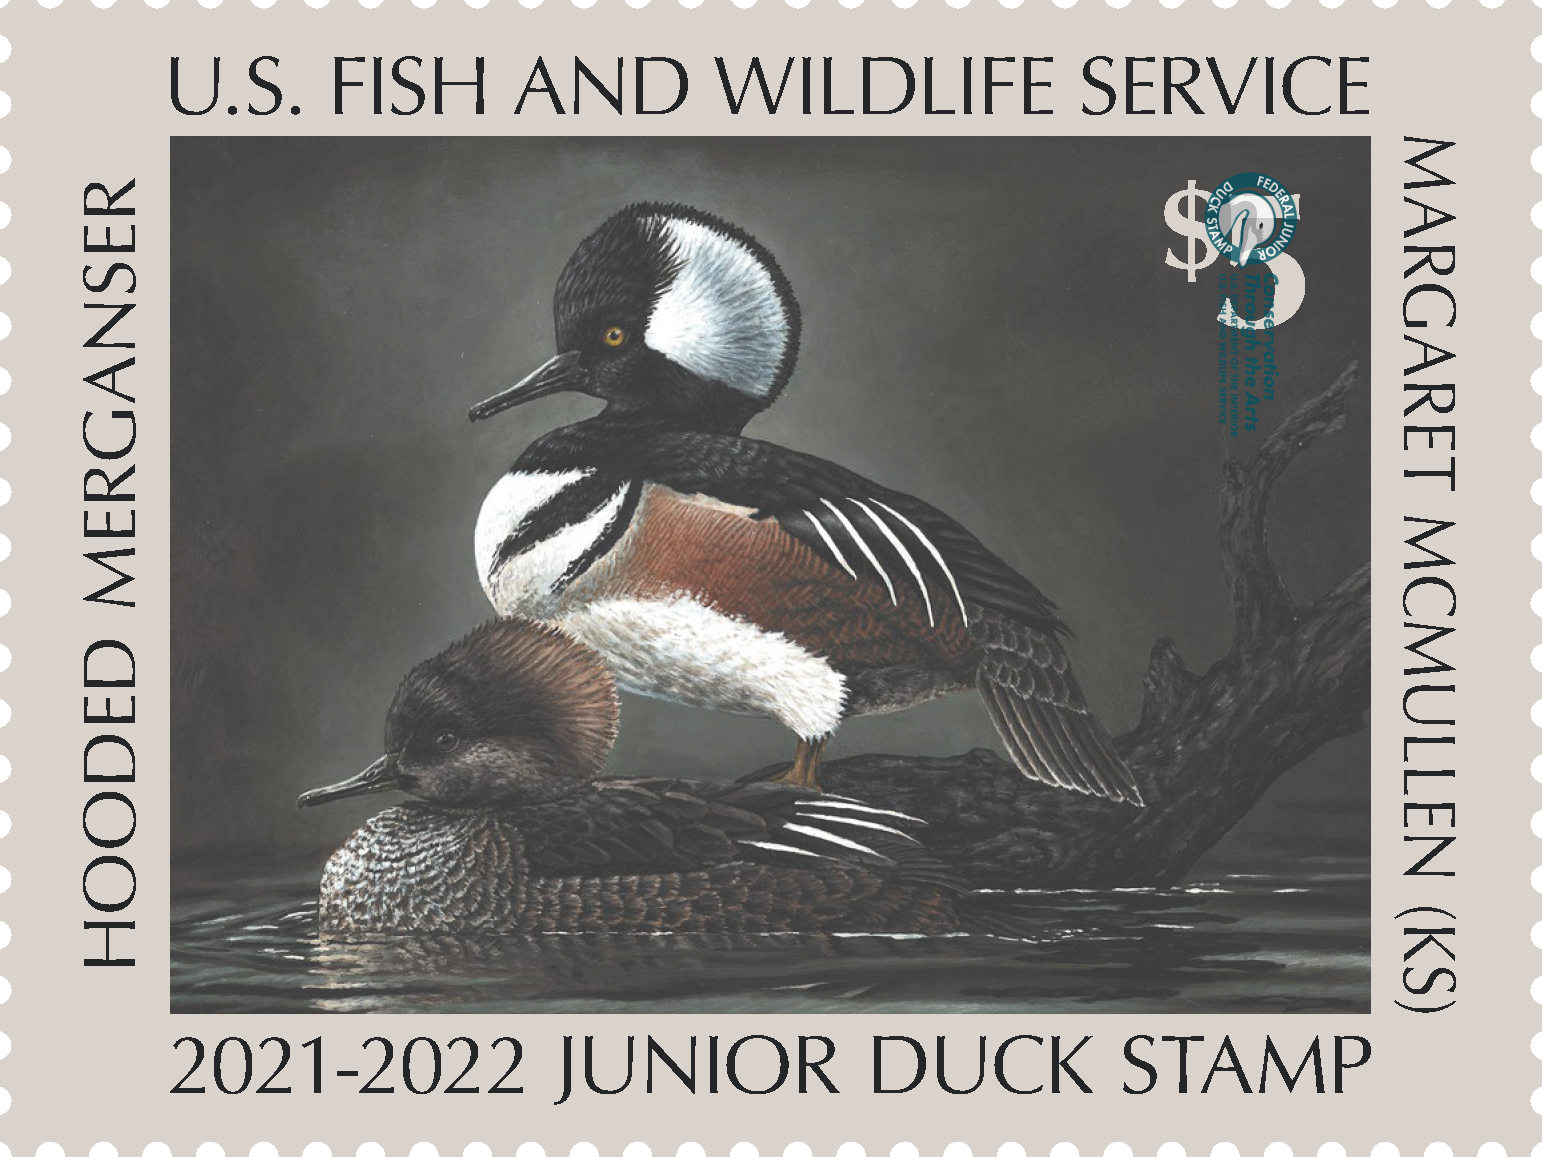 Junior Duck Stamp with two hooded merganser